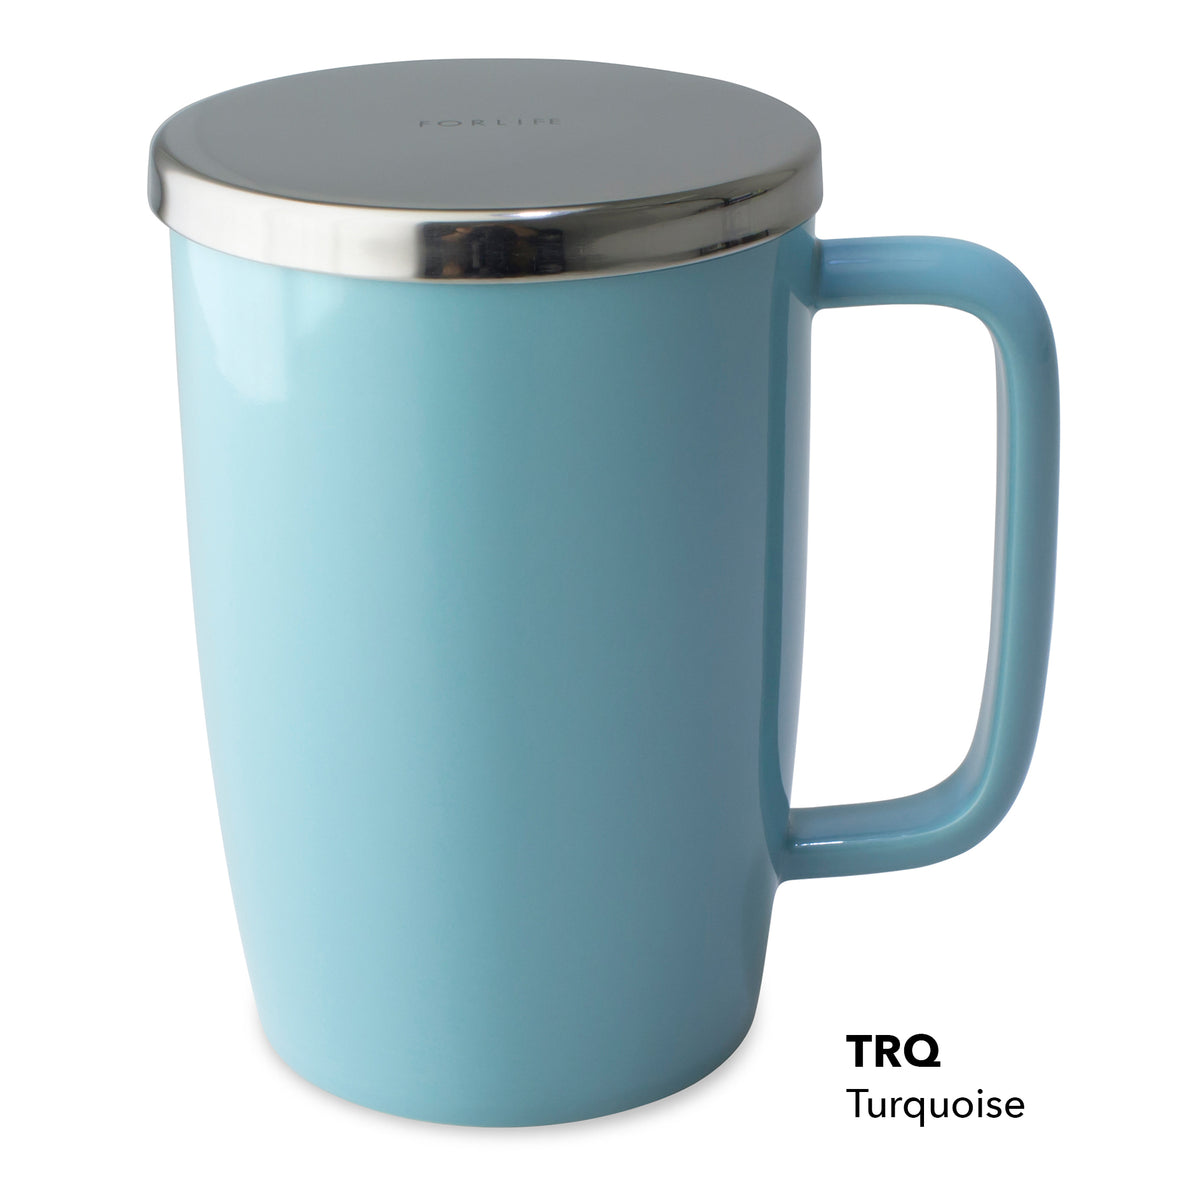 FORLIFE Mug With Basket Infuser and Stainless Steel Lid : Glossy Turquoise